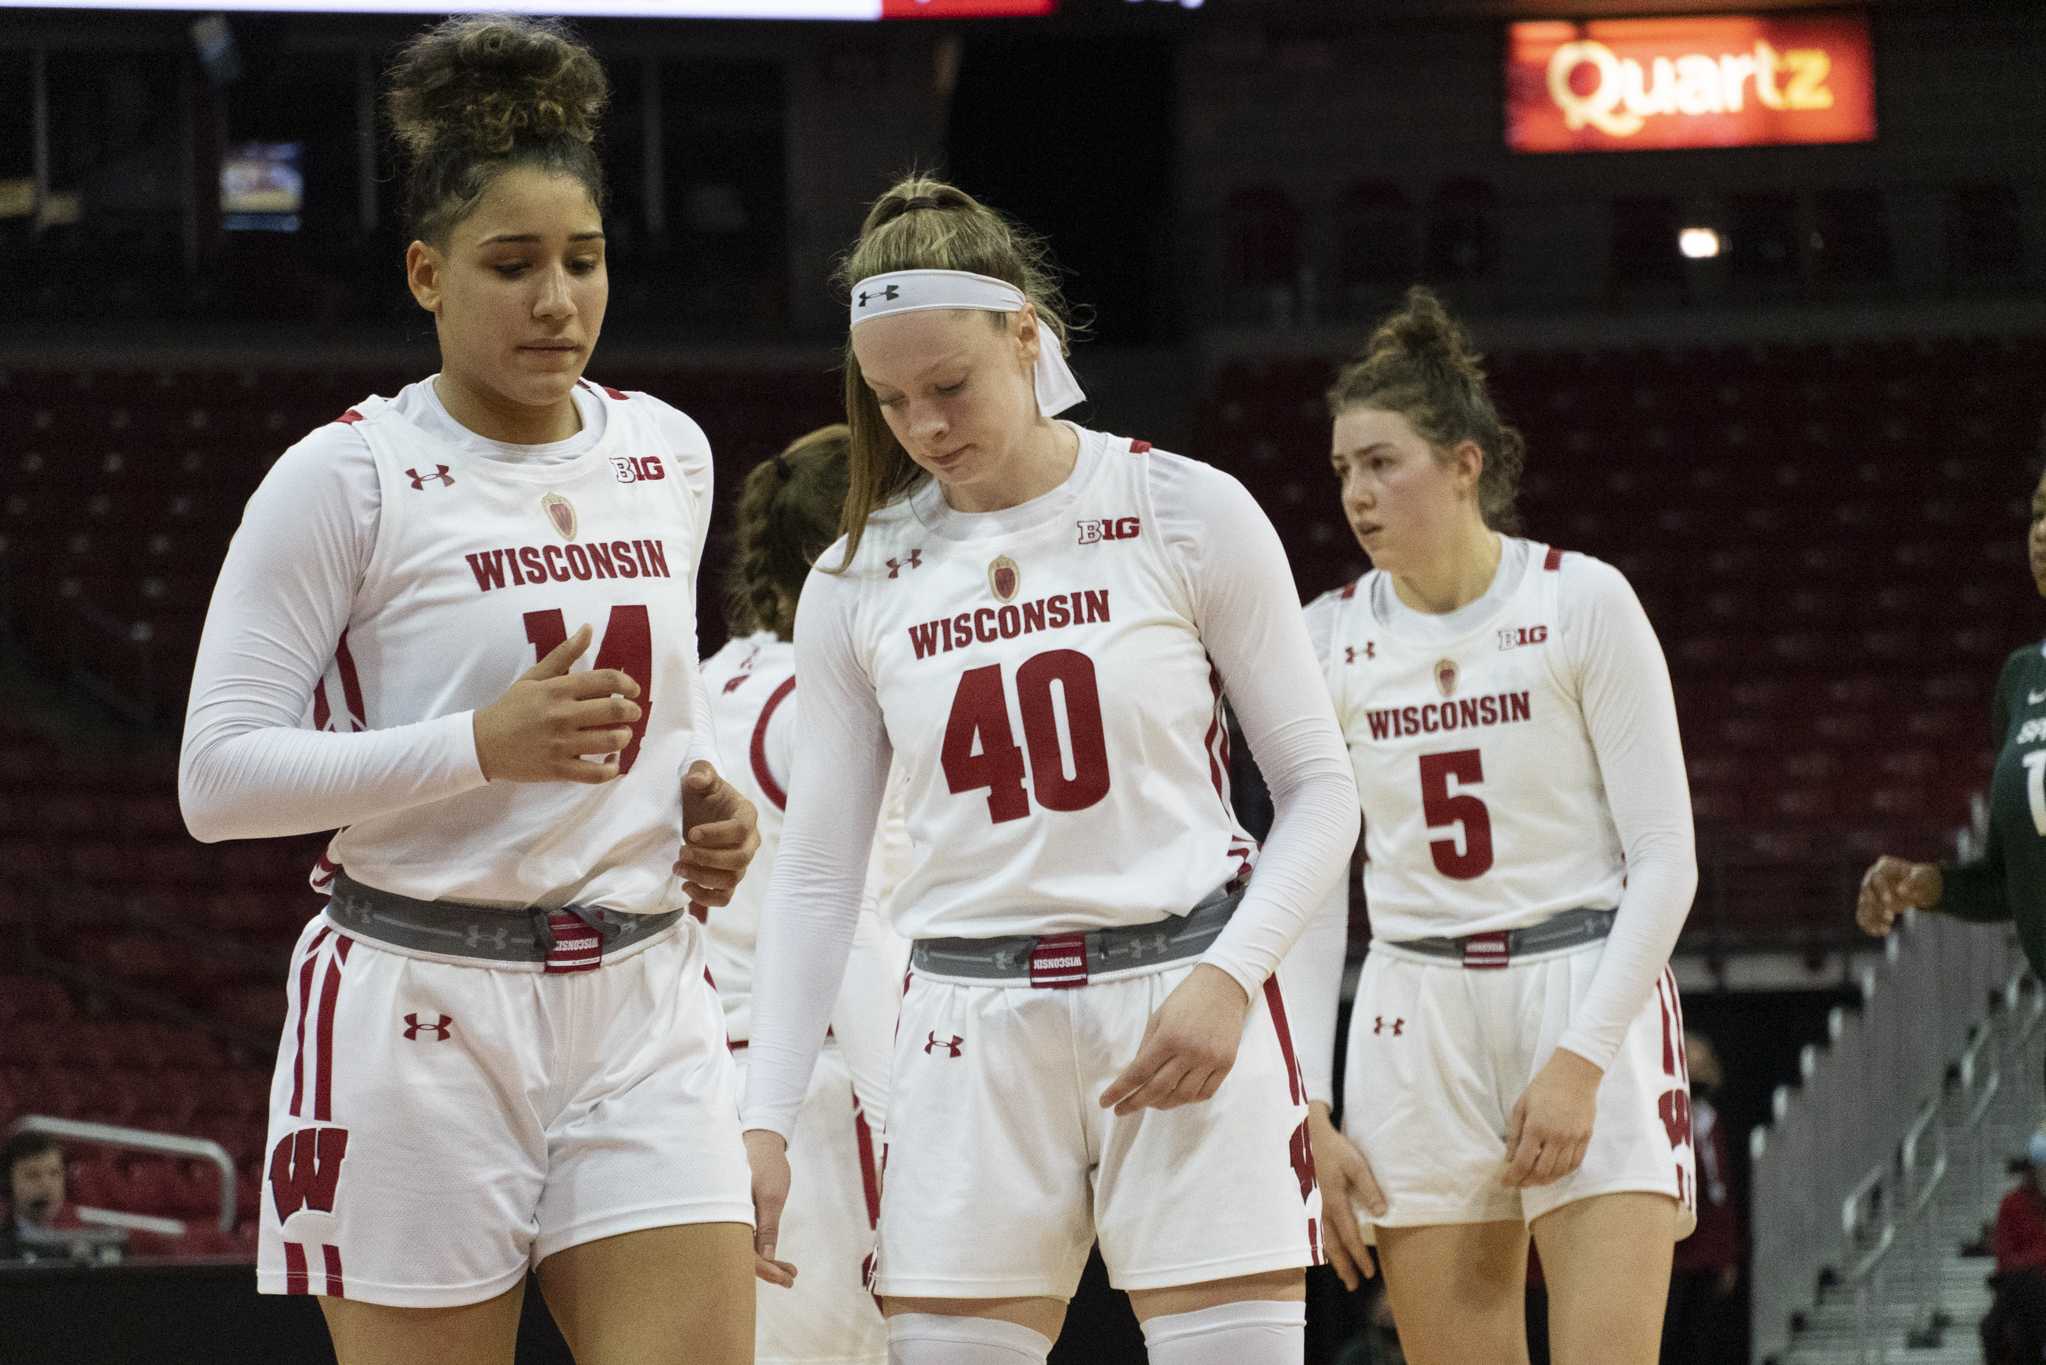 Women’s Basketball Badgers finish rebuilding year, look to expand